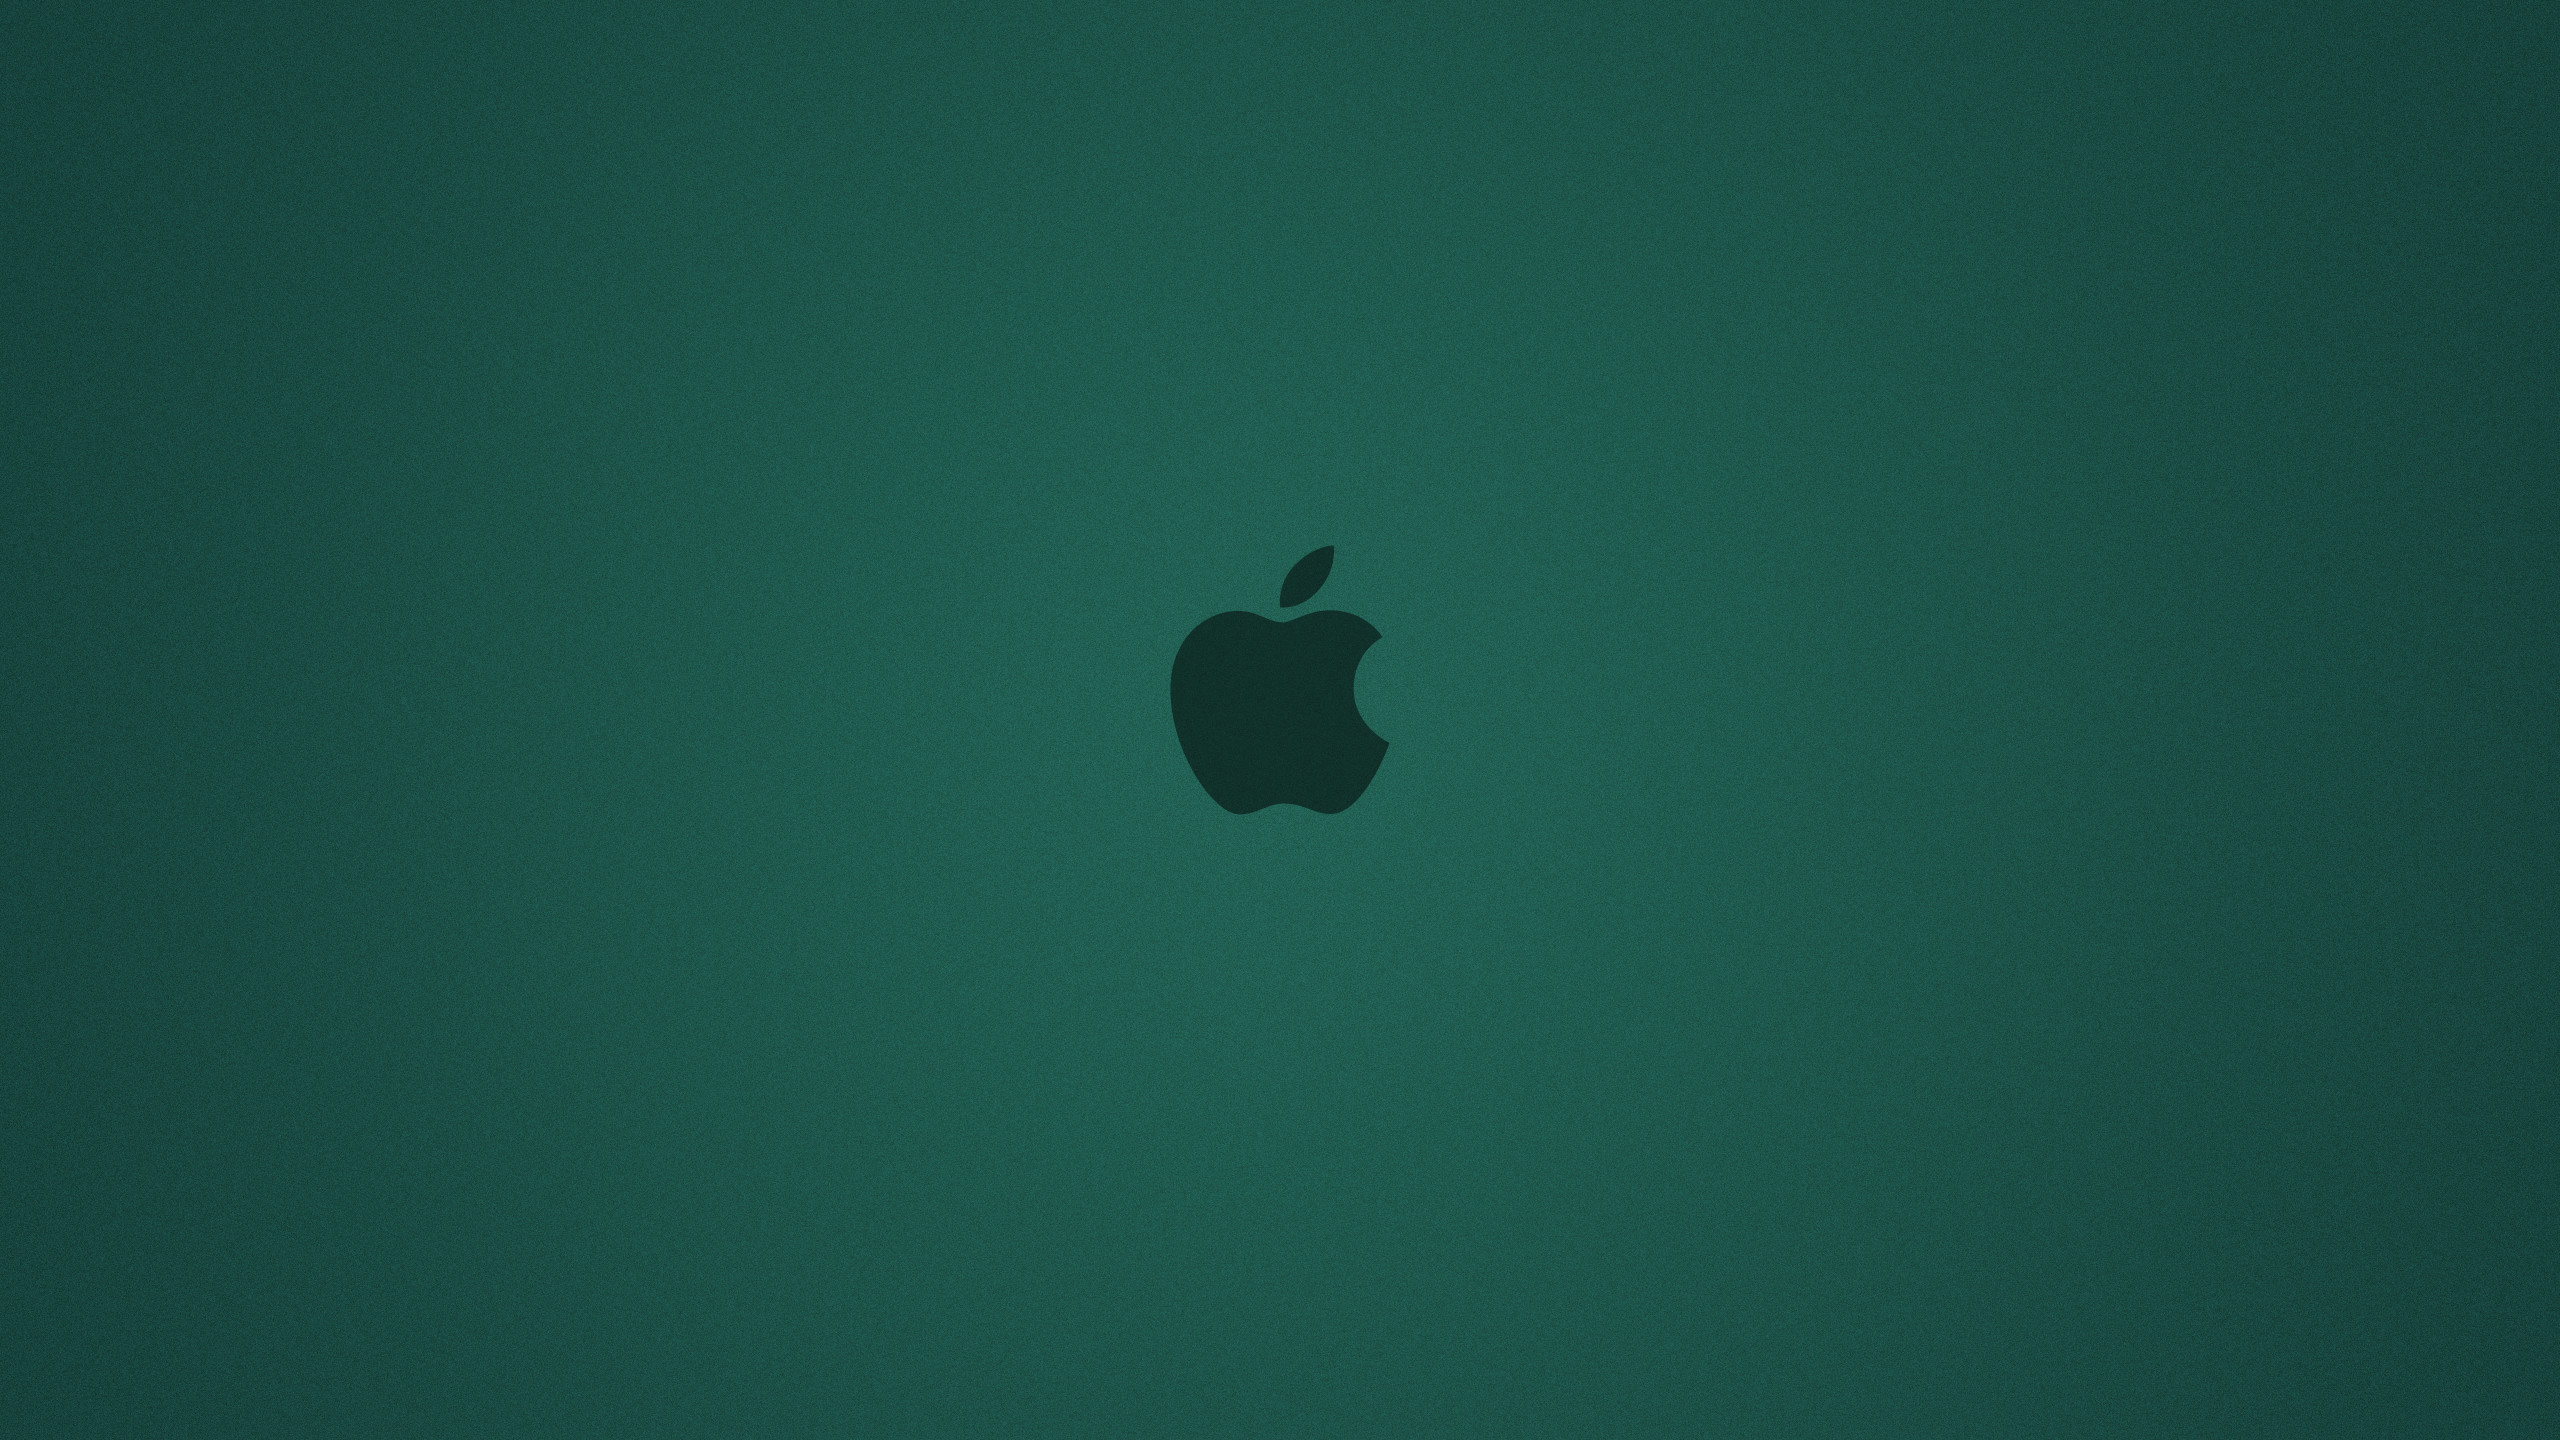 Cyan Apple Background Youtube Channel Cover Data-src - Granny Smith -  2560x1440 Wallpaper 